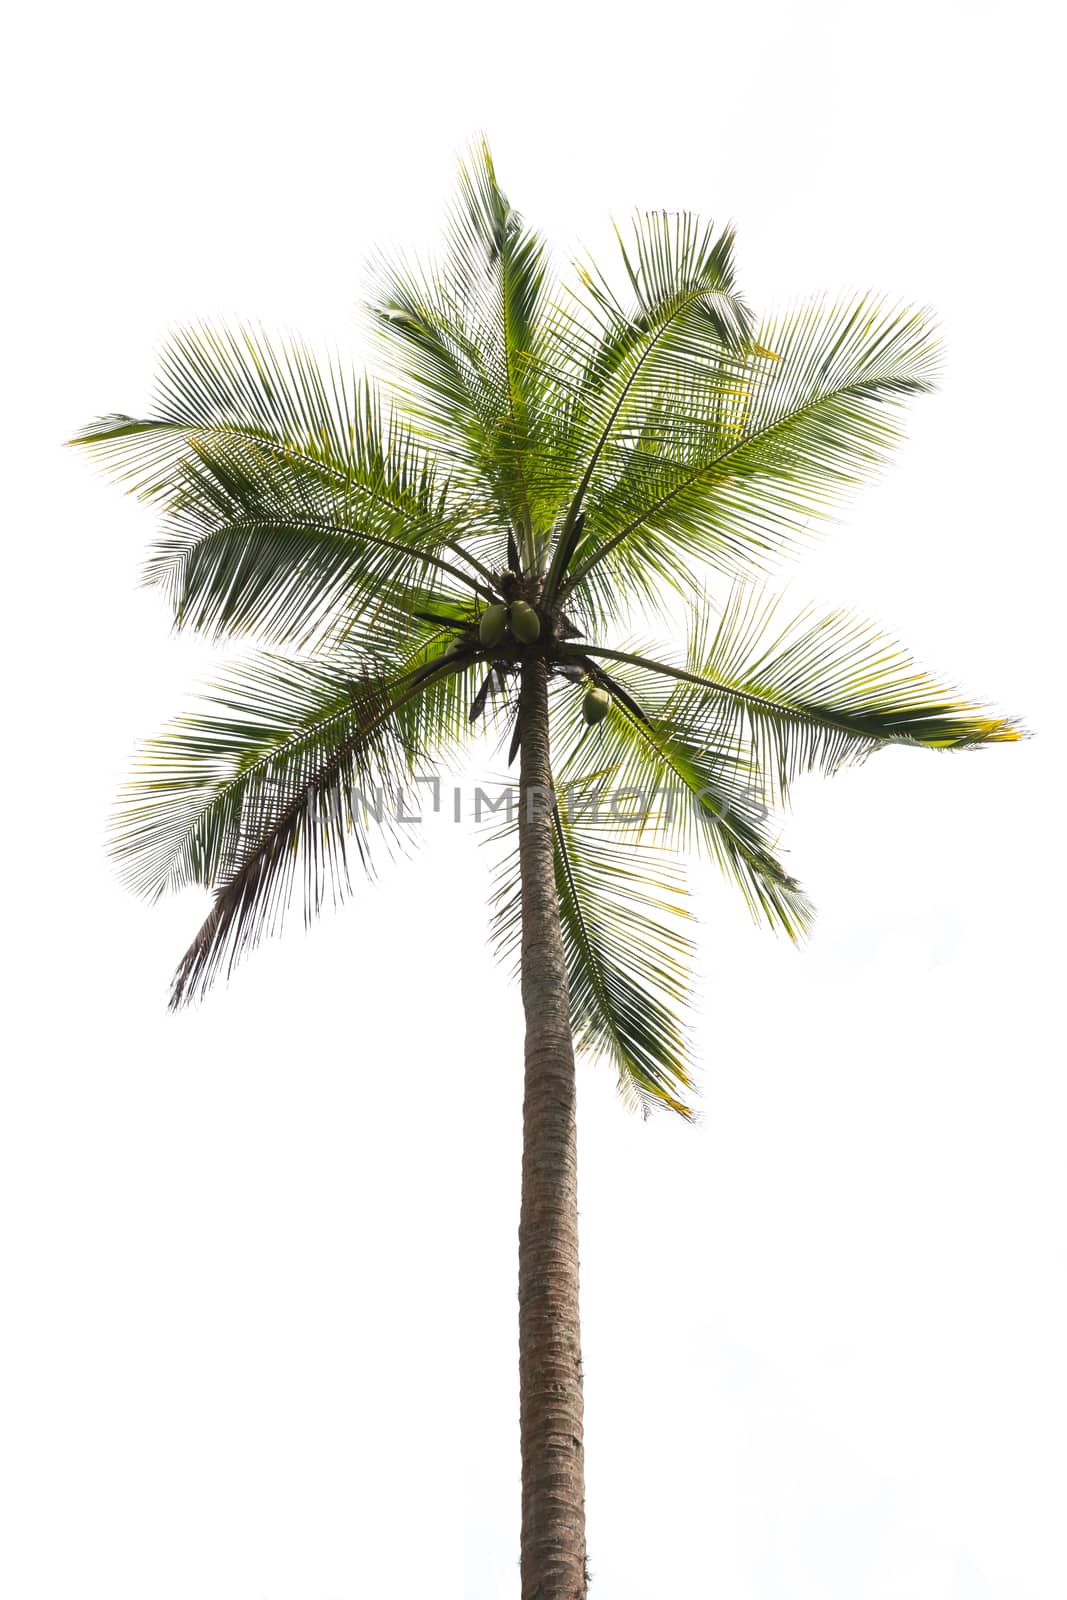 Coconut palm isolated on white. Southern Province, Sri Lanka, Asia.